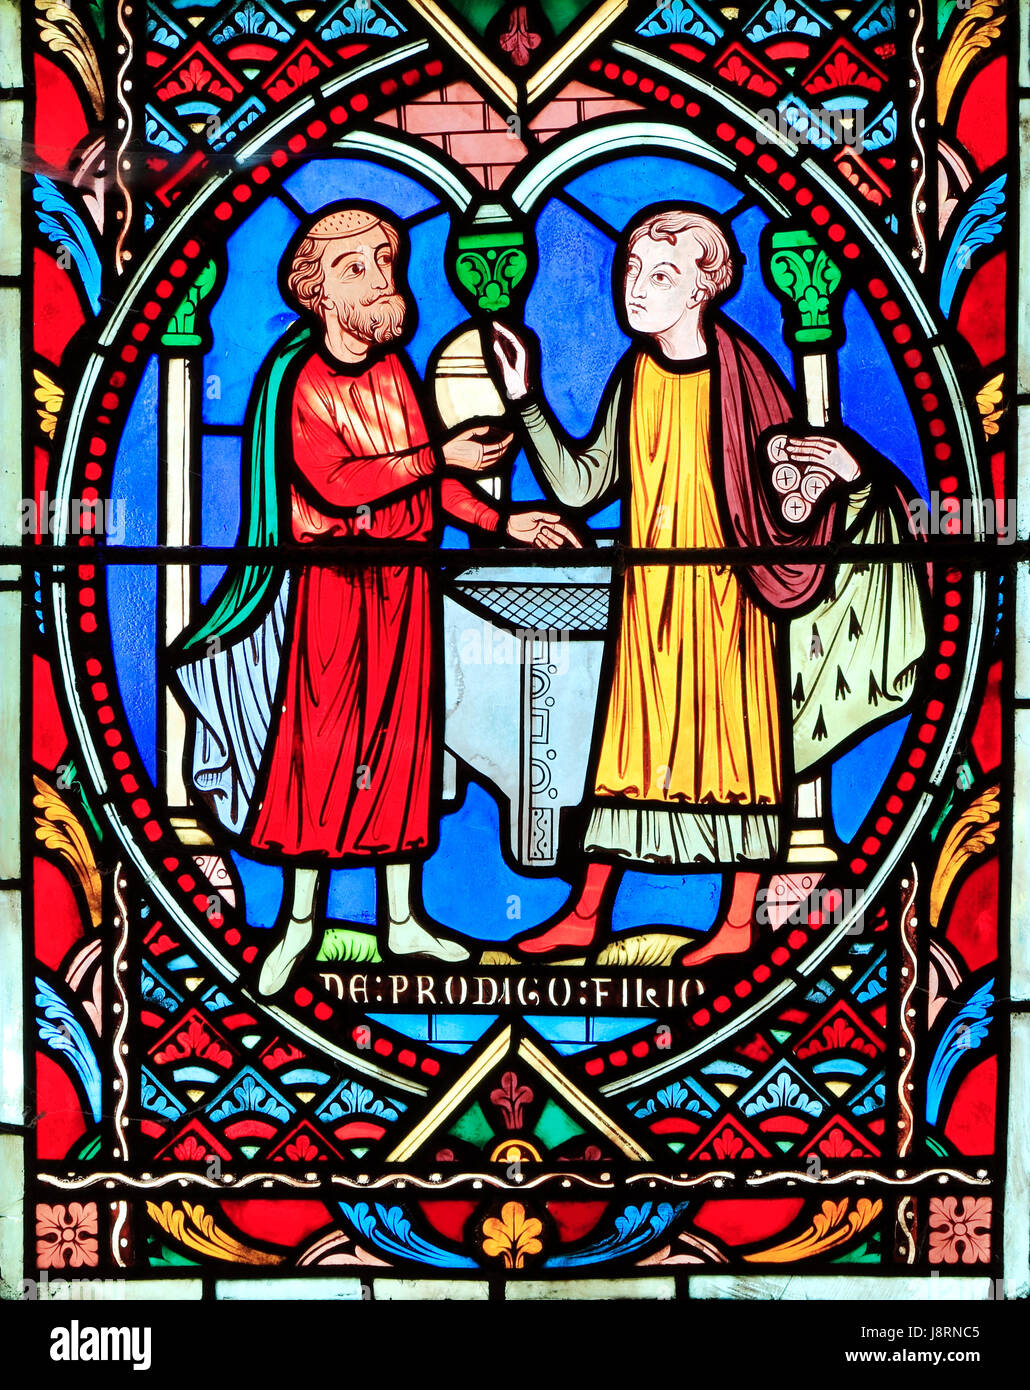 Parable of The Prodigal Son, by Adolph Didron of Paris, 1859.  Stained glass window, Feltwell Church, Norfolk, Prodigal Son receives his inheritance Stock Photo